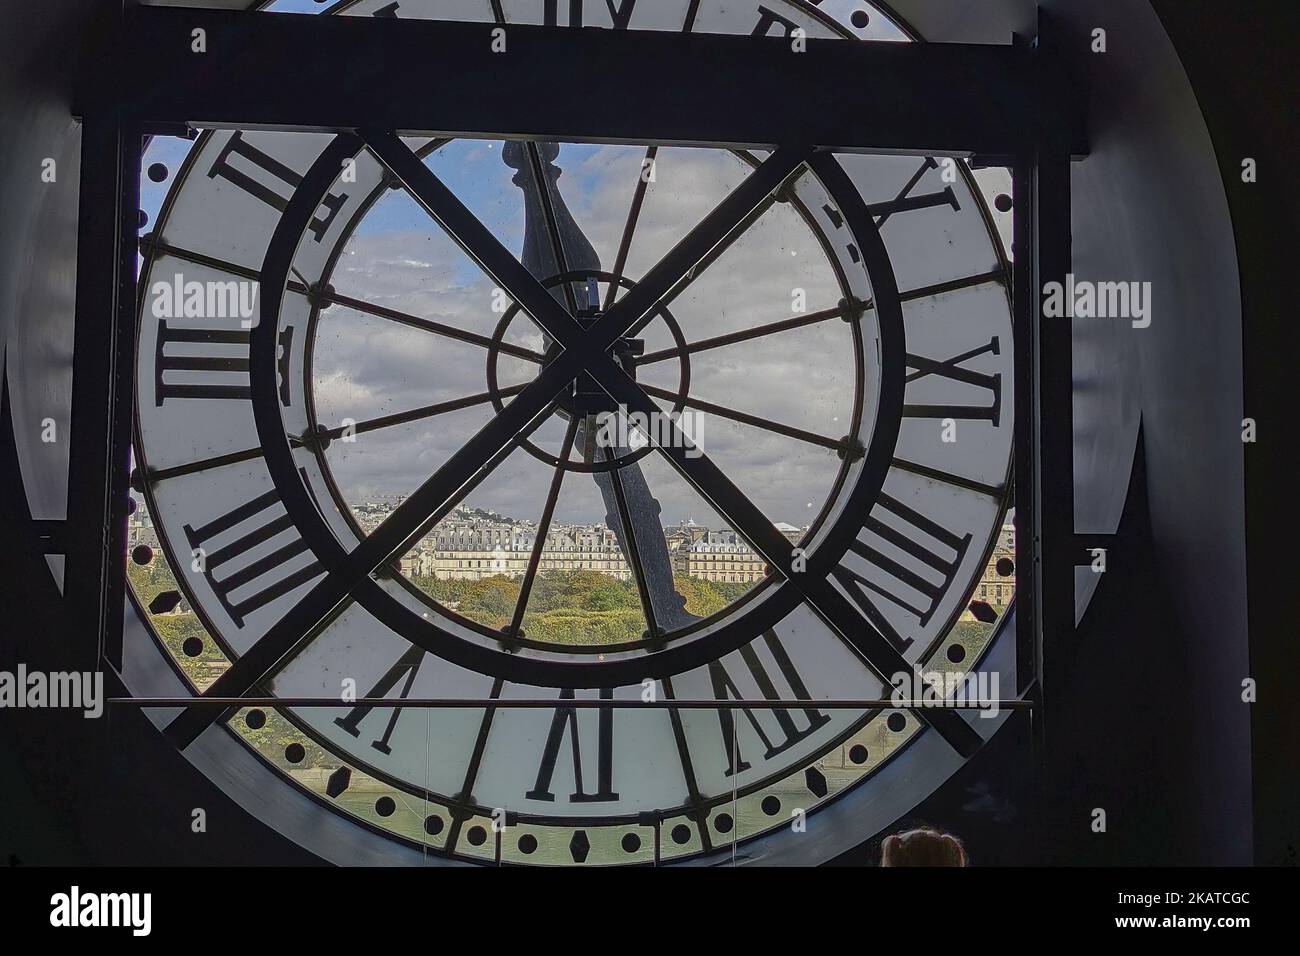 France, Paris, Musee d'Orsay housed in the former Gare d'Orsay, a Beaux-Arts railway station. t houses the largest collection of Impressionist and pos Stock Photo